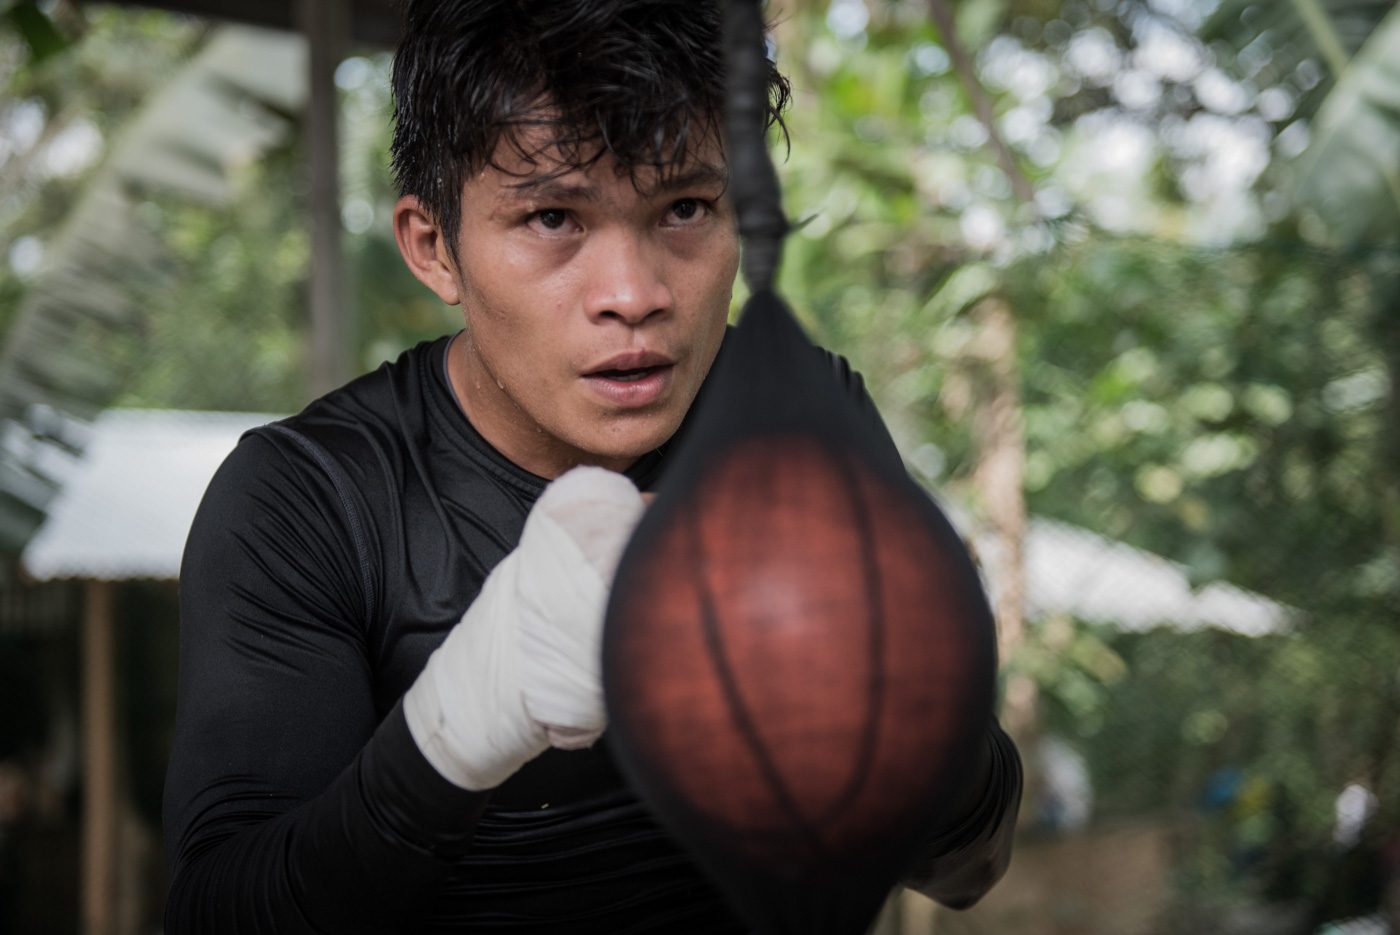 Before becoming champion, Jerwin Ancajas fought poverty and hunger